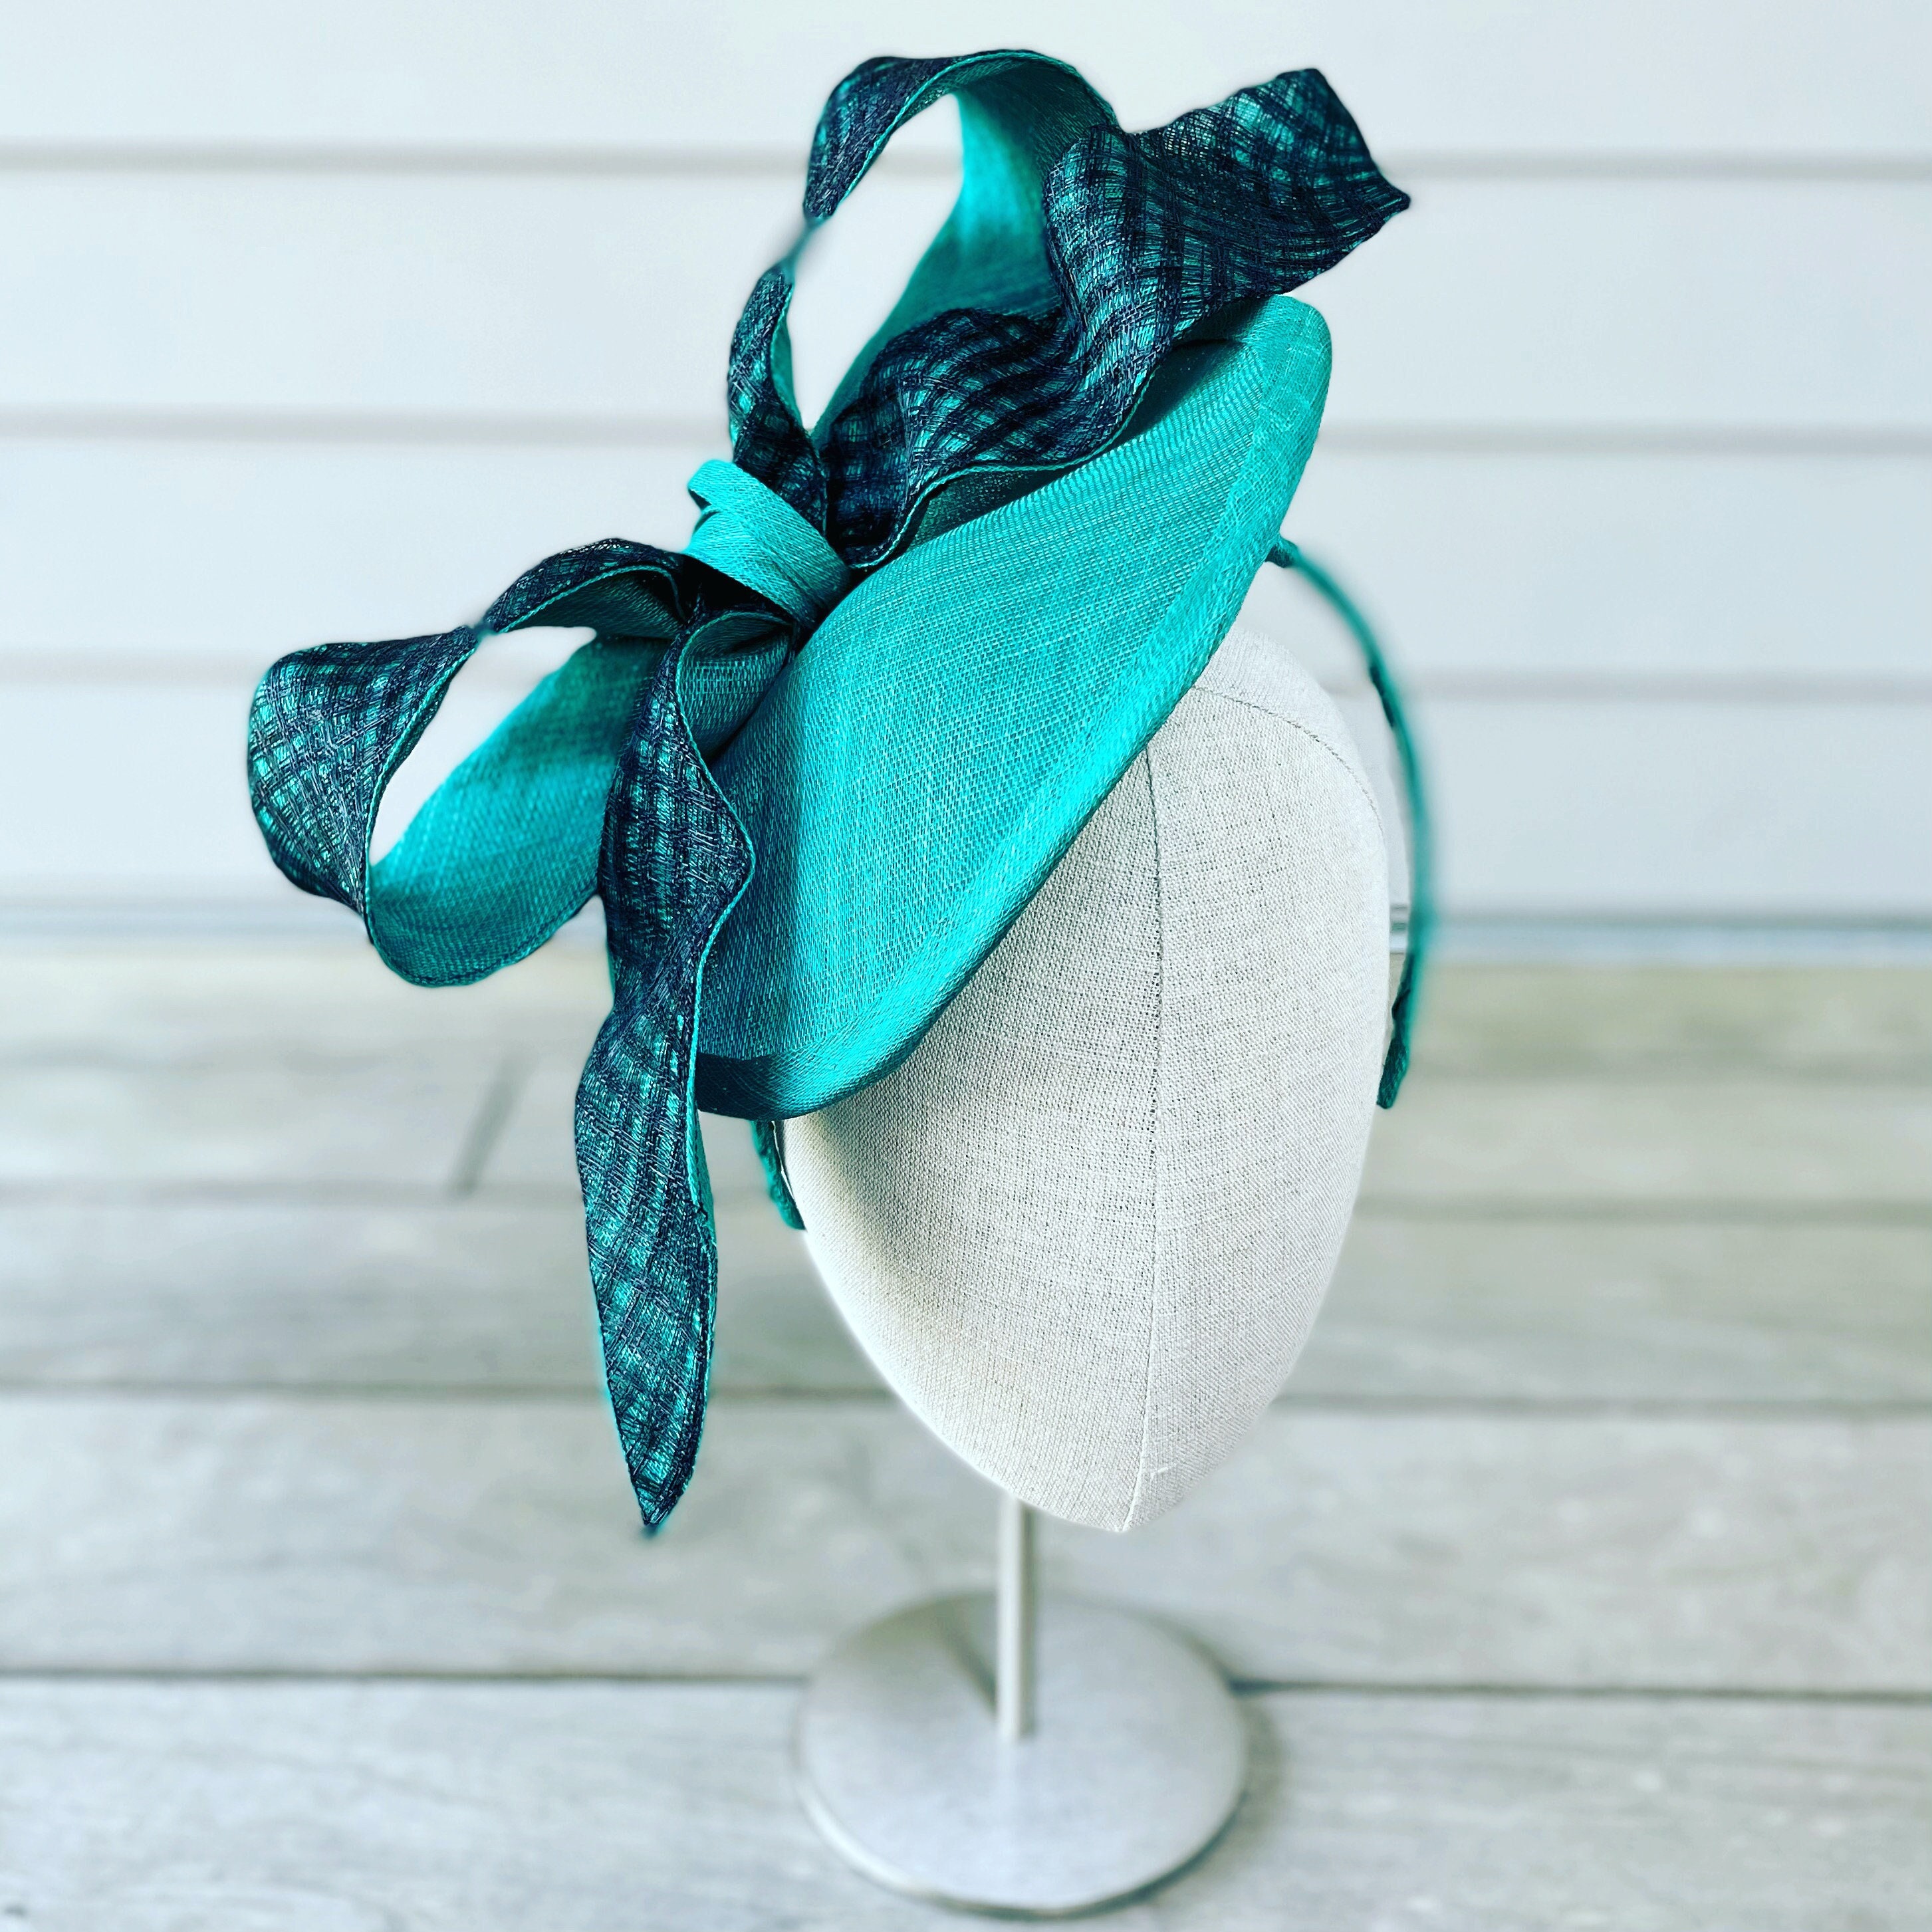 Teal pinokpok sinamay straw saucer hat with large teal and black windowpane  sinamay straw bow on headband